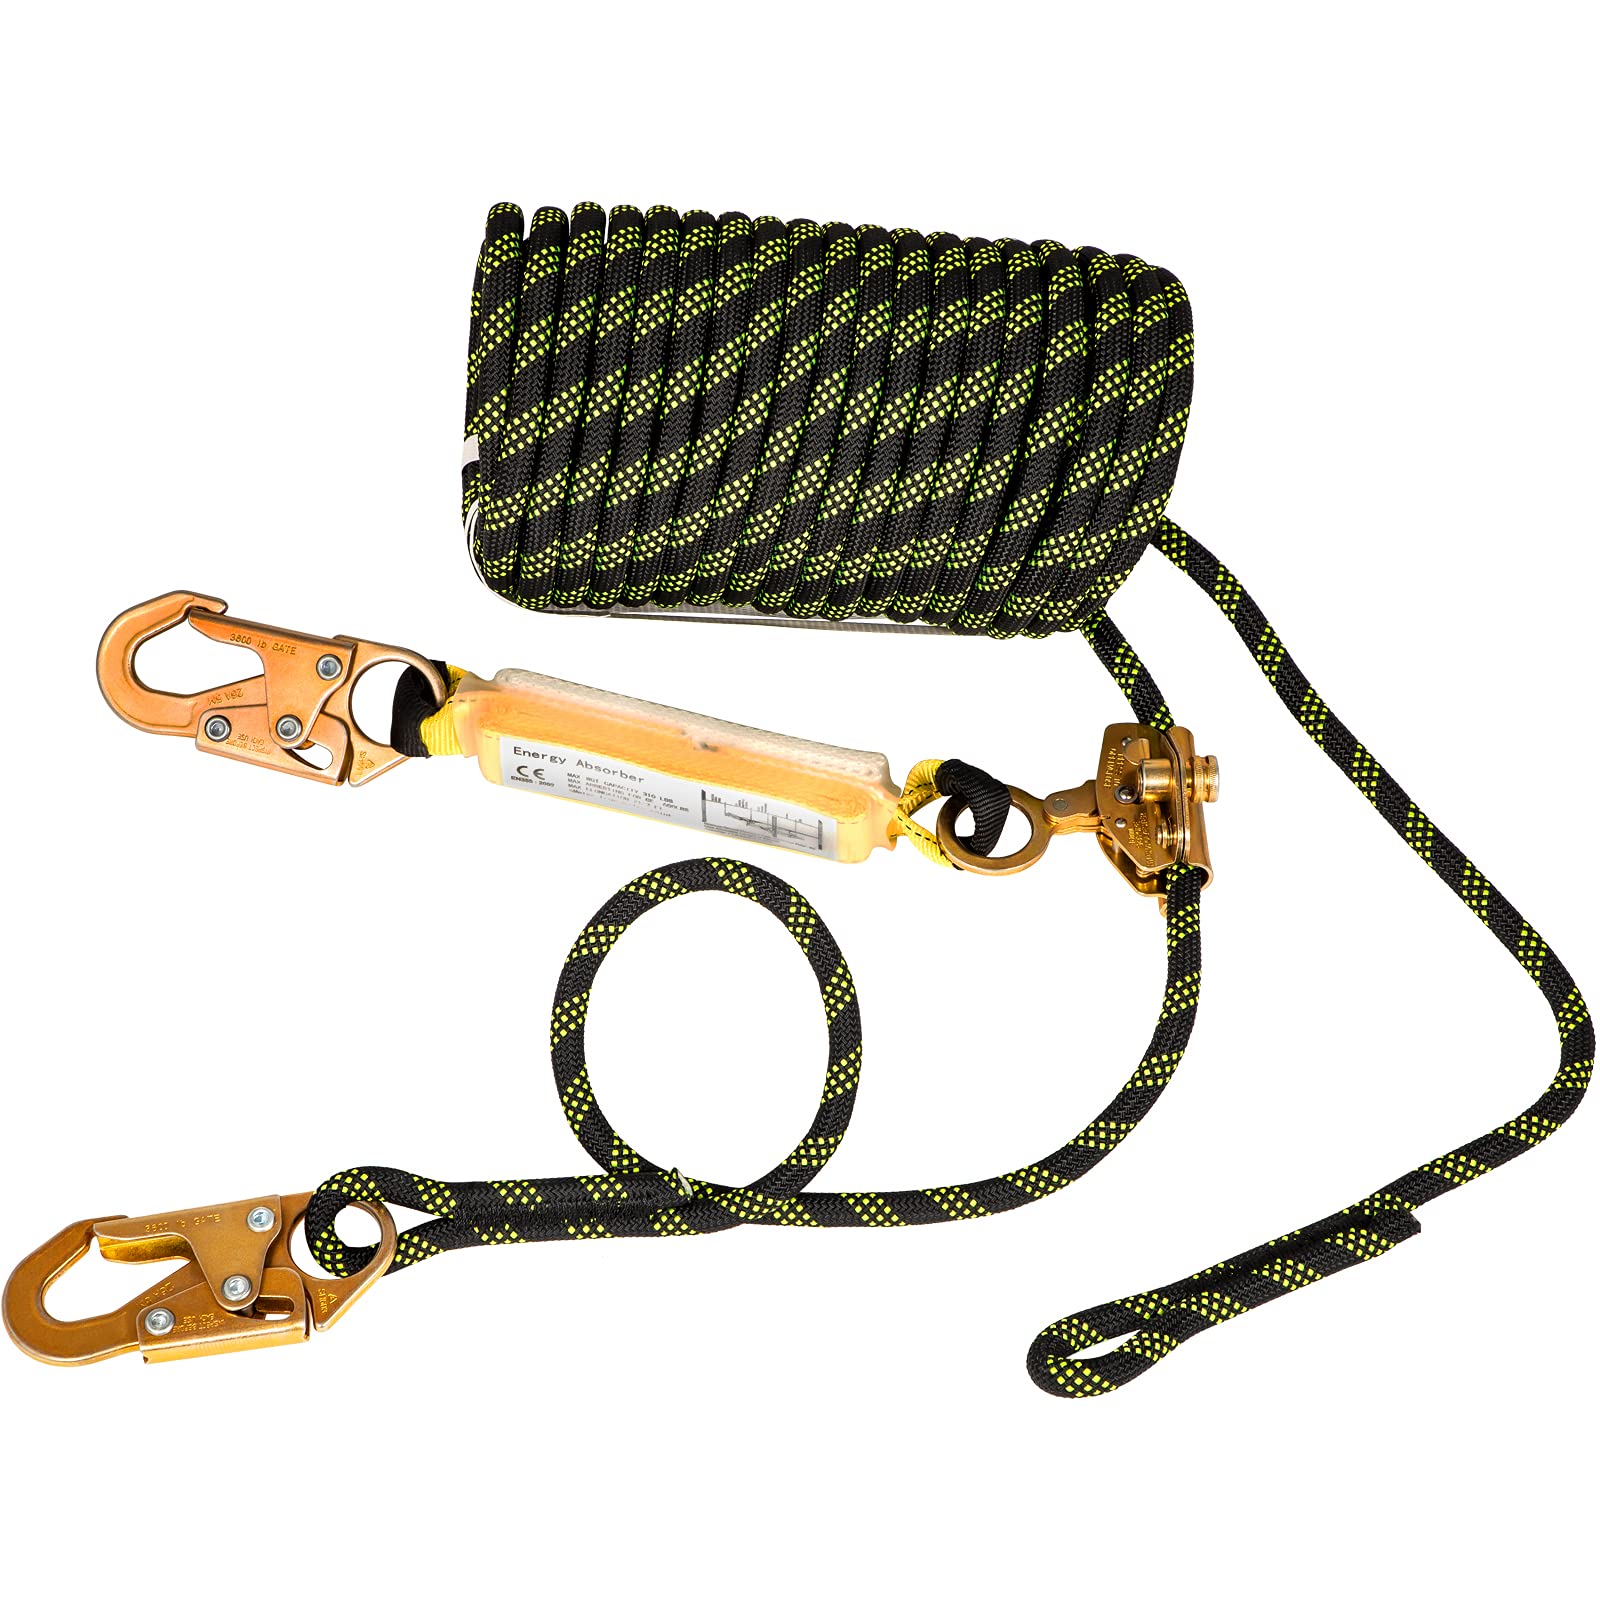 VEVOR Vertical Lifeline Assembly, Fall Protection Rope, Polyester Roofing Rope, CE Compliant Fall Arrest Protection Equipment with Alloy Steel Rope Grab, Two Snap Hooks, Shock Absorber